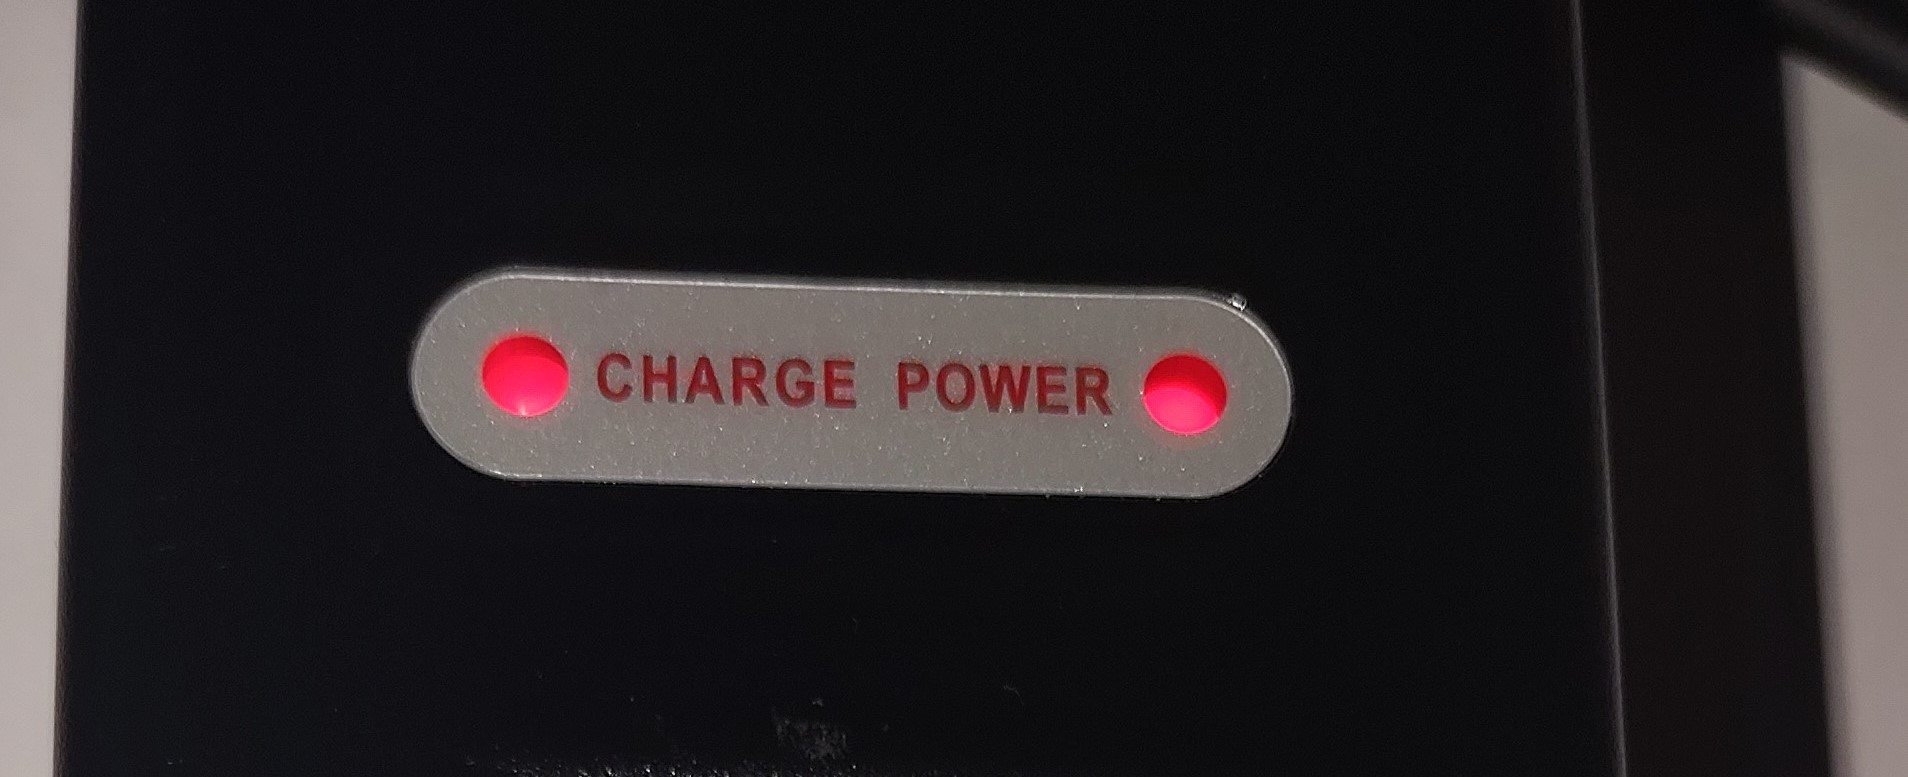 Rad charger that has two indicator lights and both are red